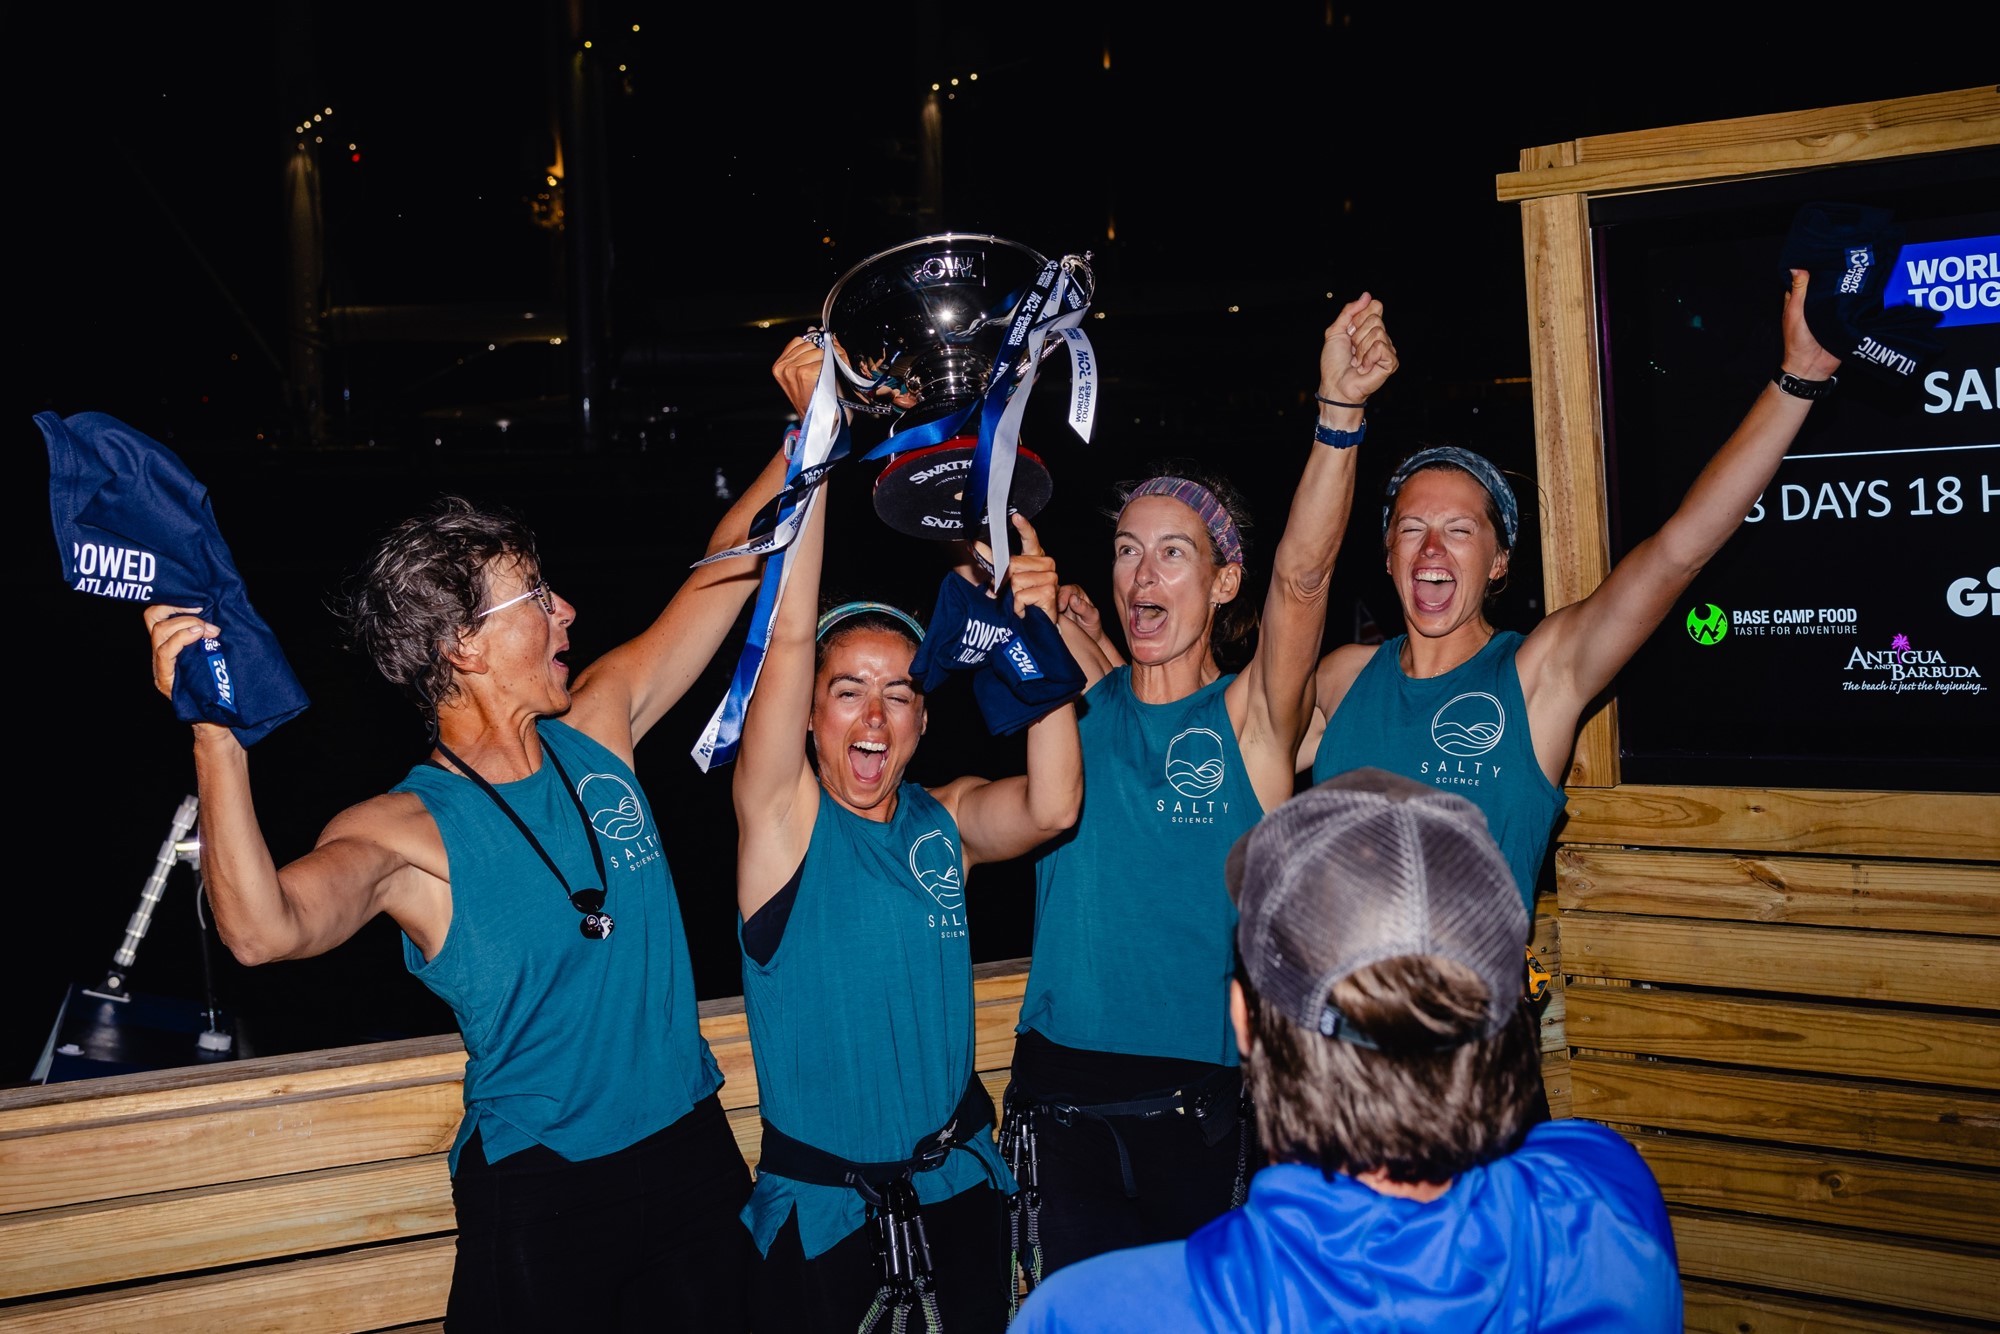 Four women shout, raise their hands in the air and lift a ribbon-adorned silver trophy cup.